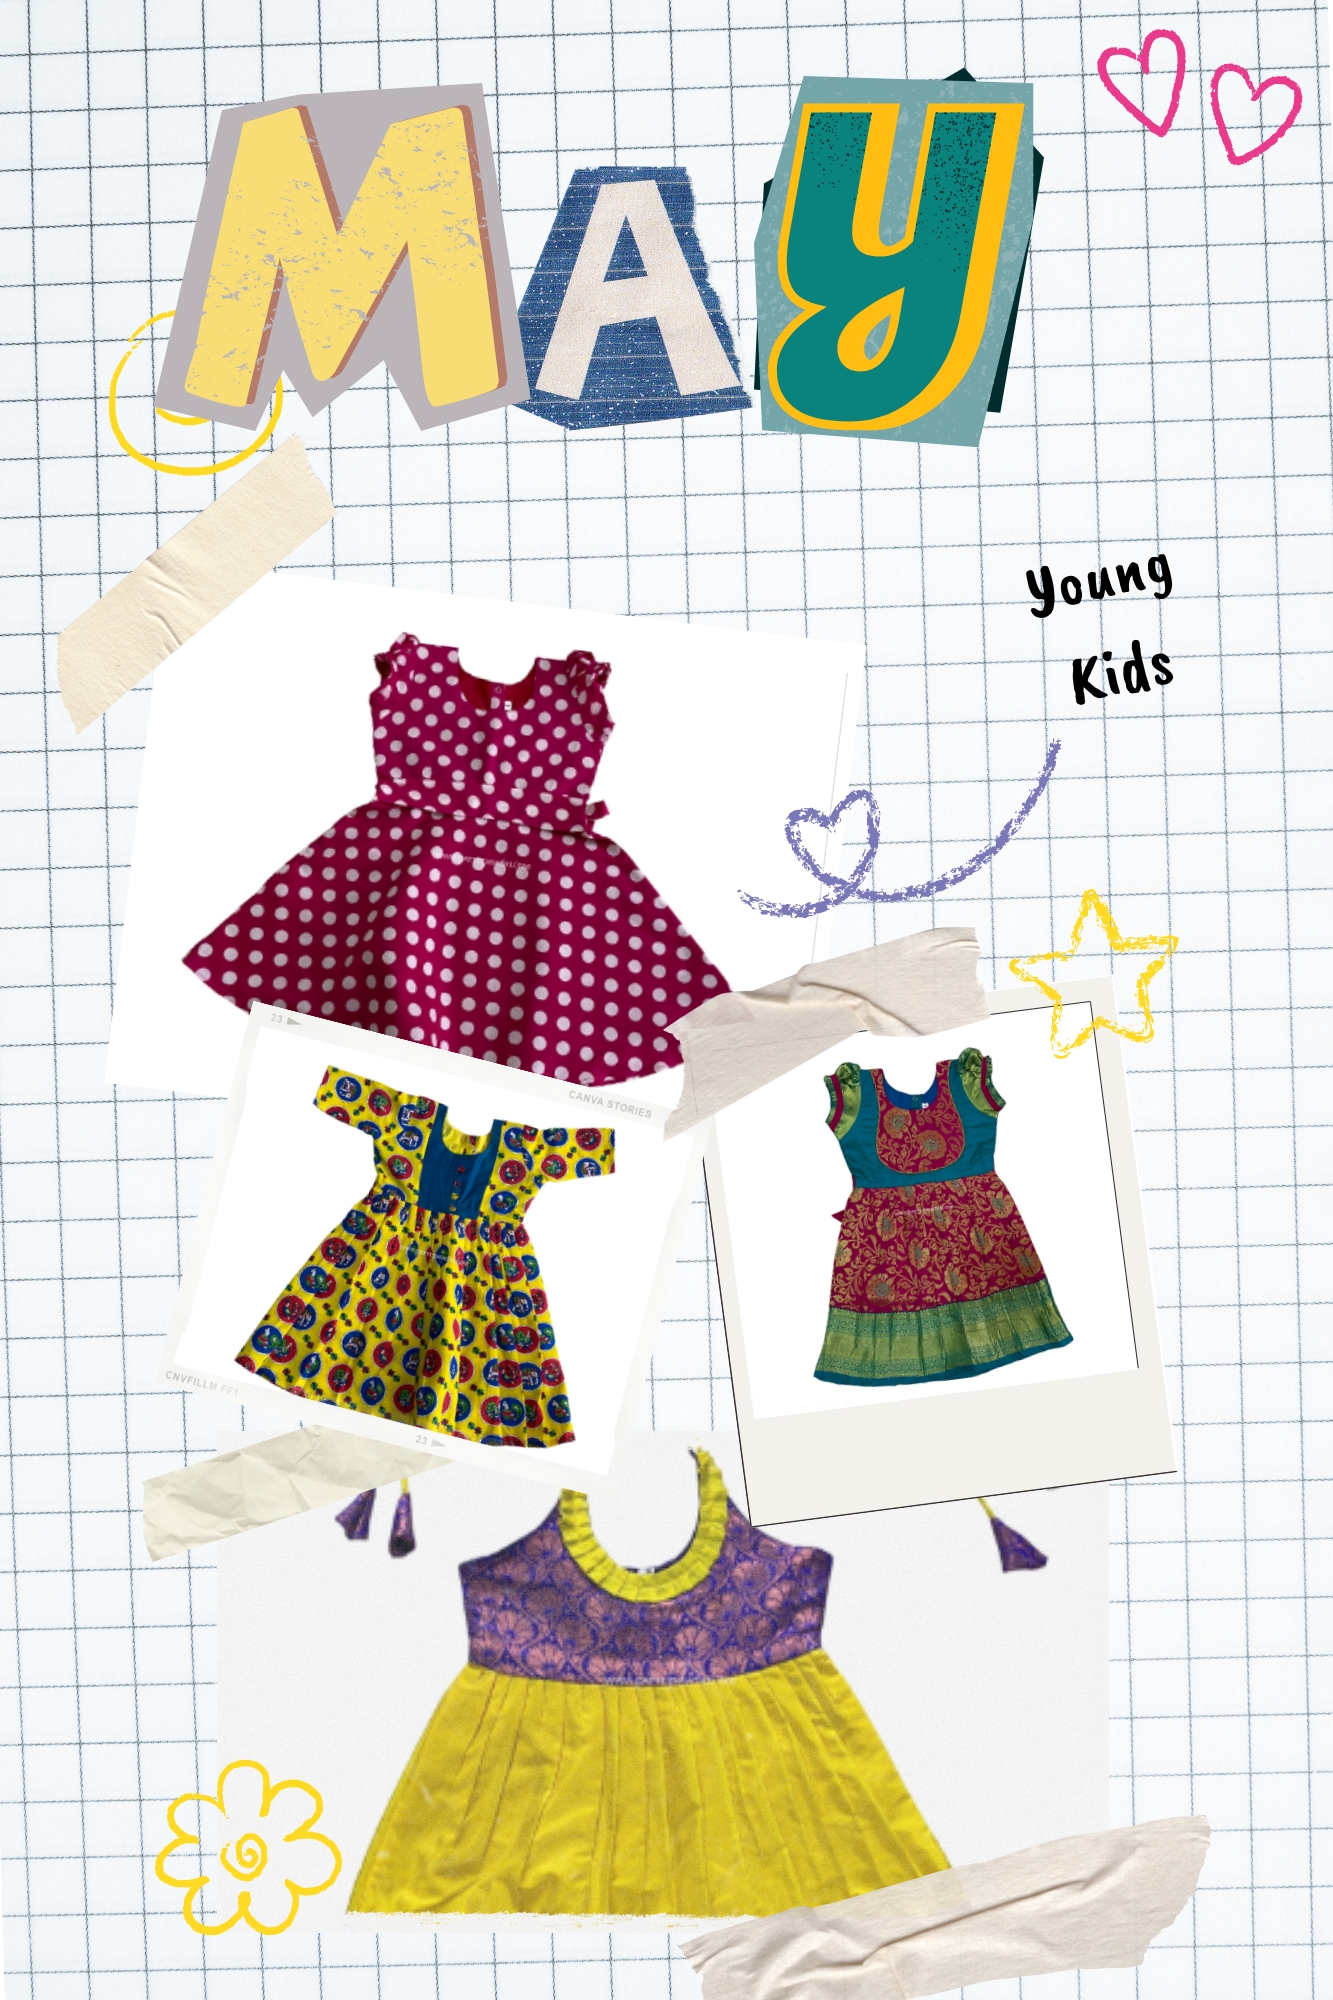 May Fashion Trends: Styling Cotton and Silk Skirts for Kids